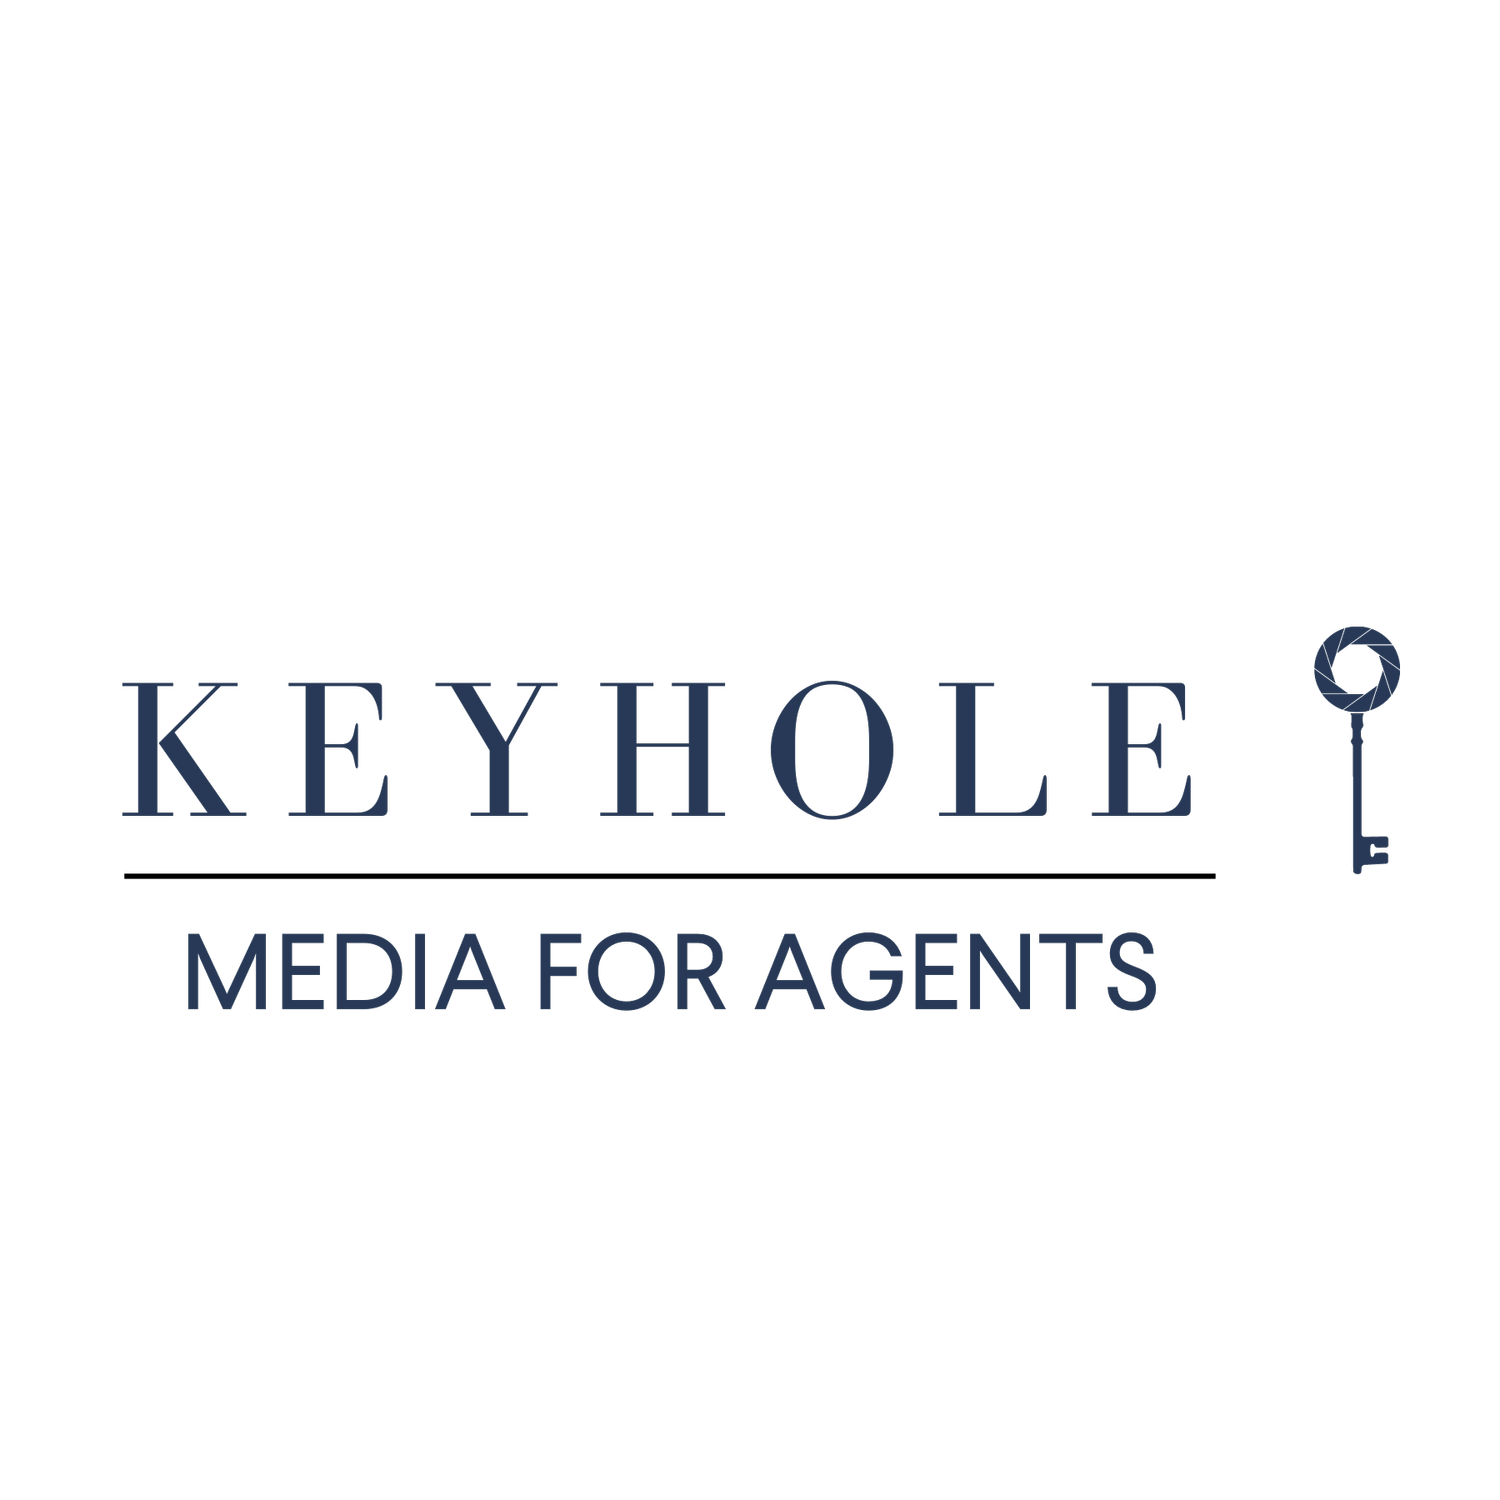 Keyhole | Media for Agents